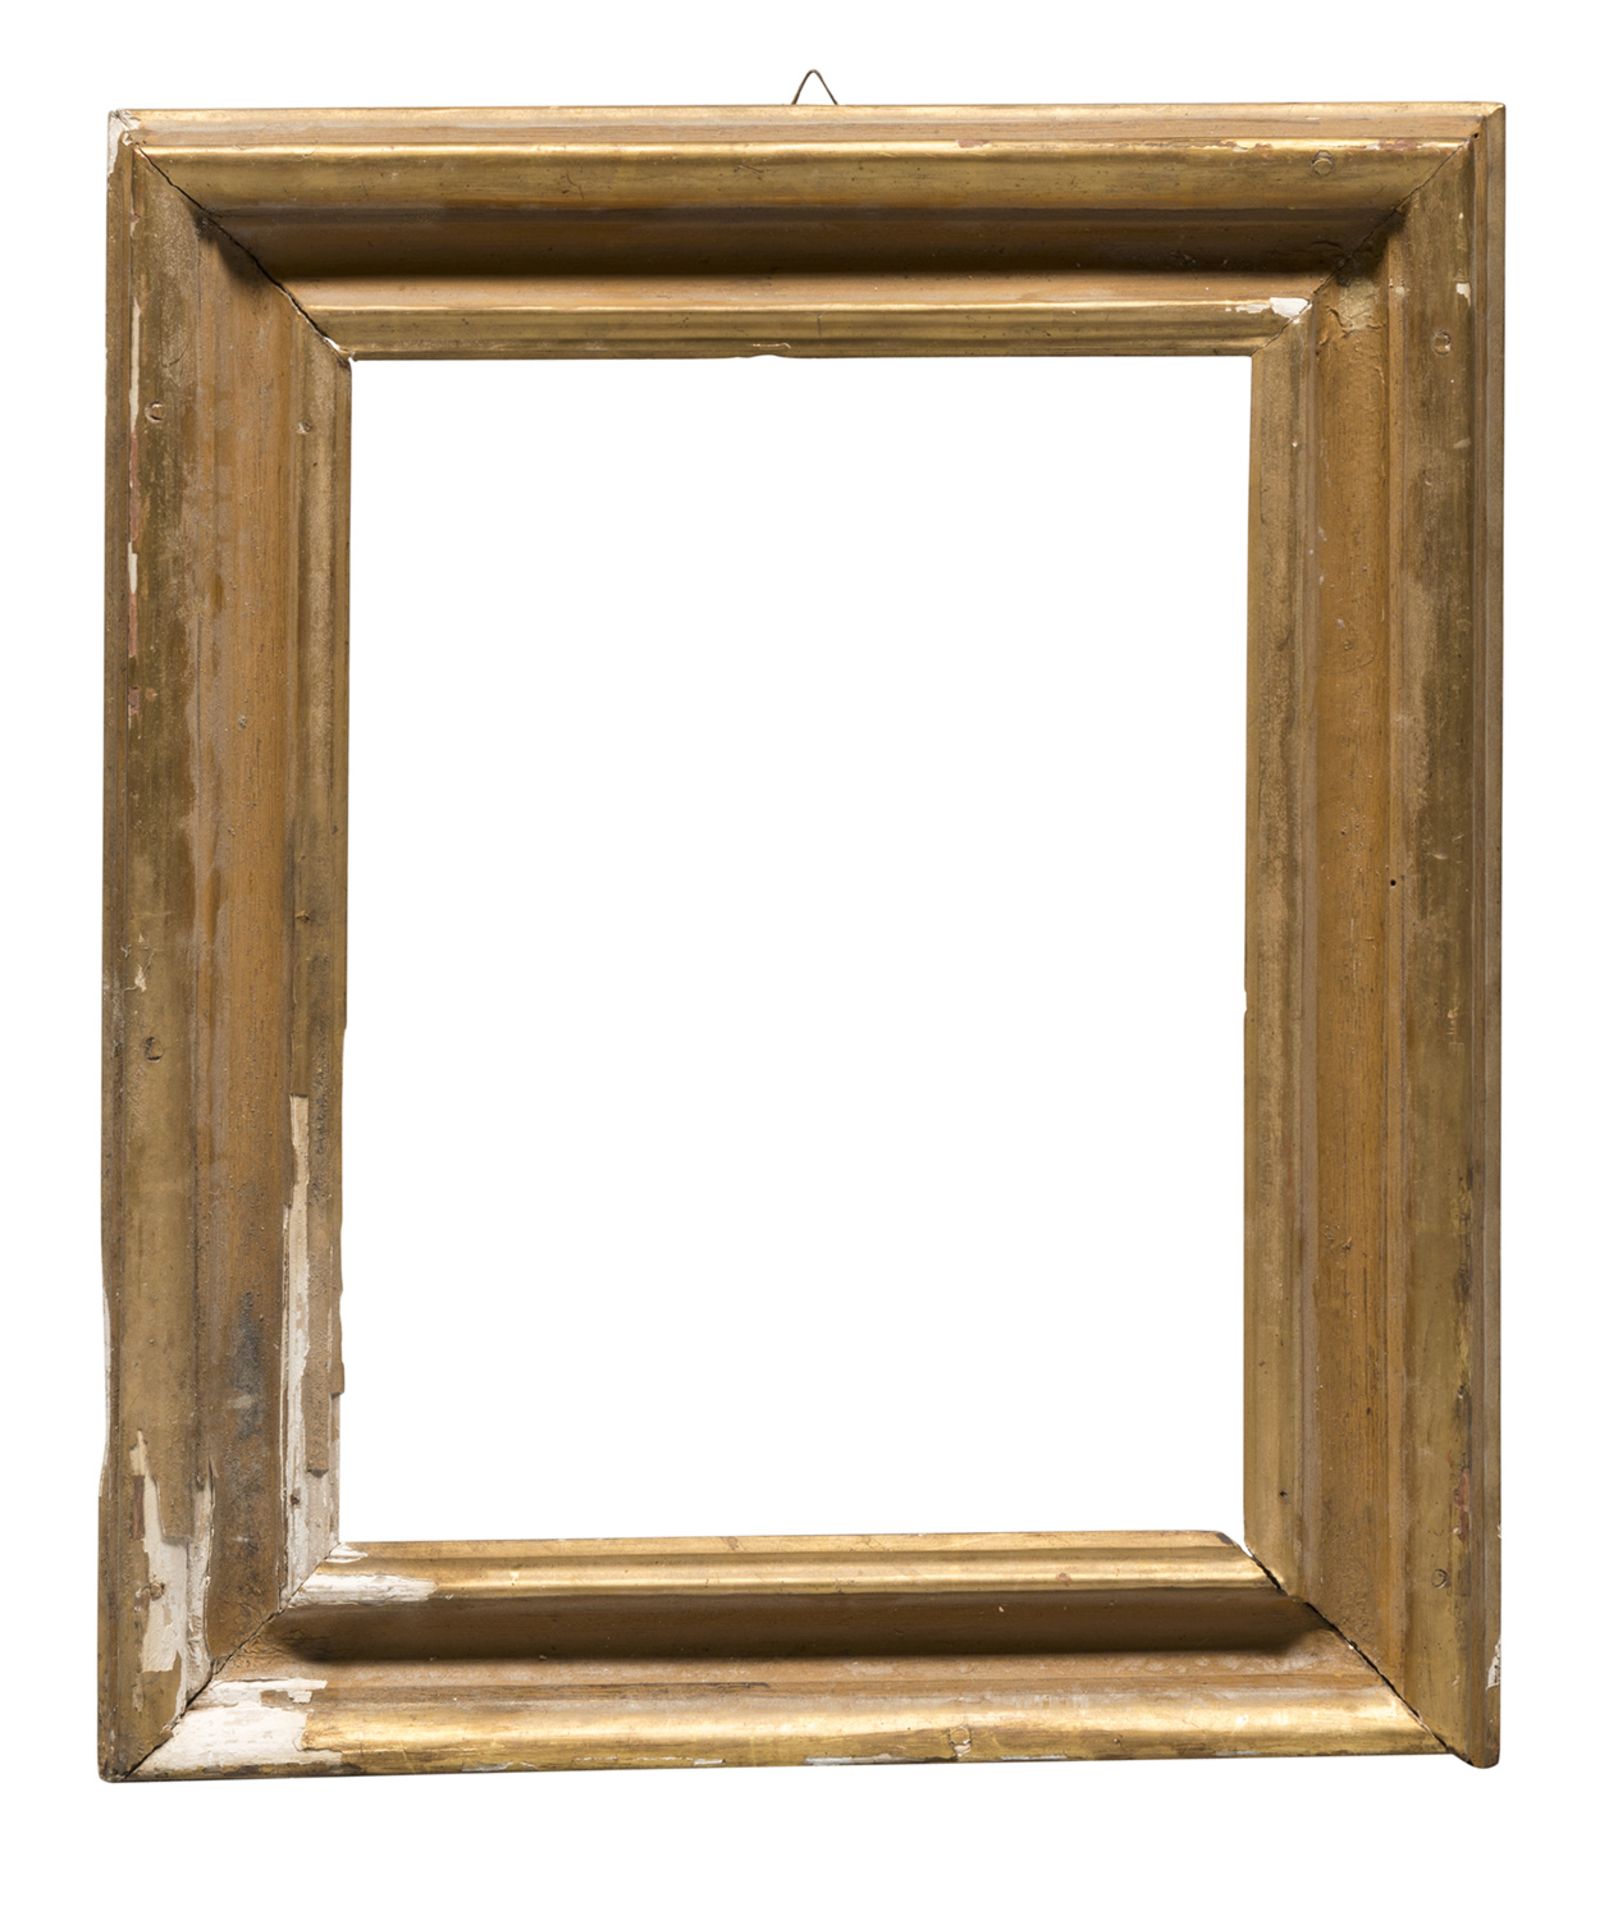 GILTWOOD FRAME LATE 18TH CENTURY